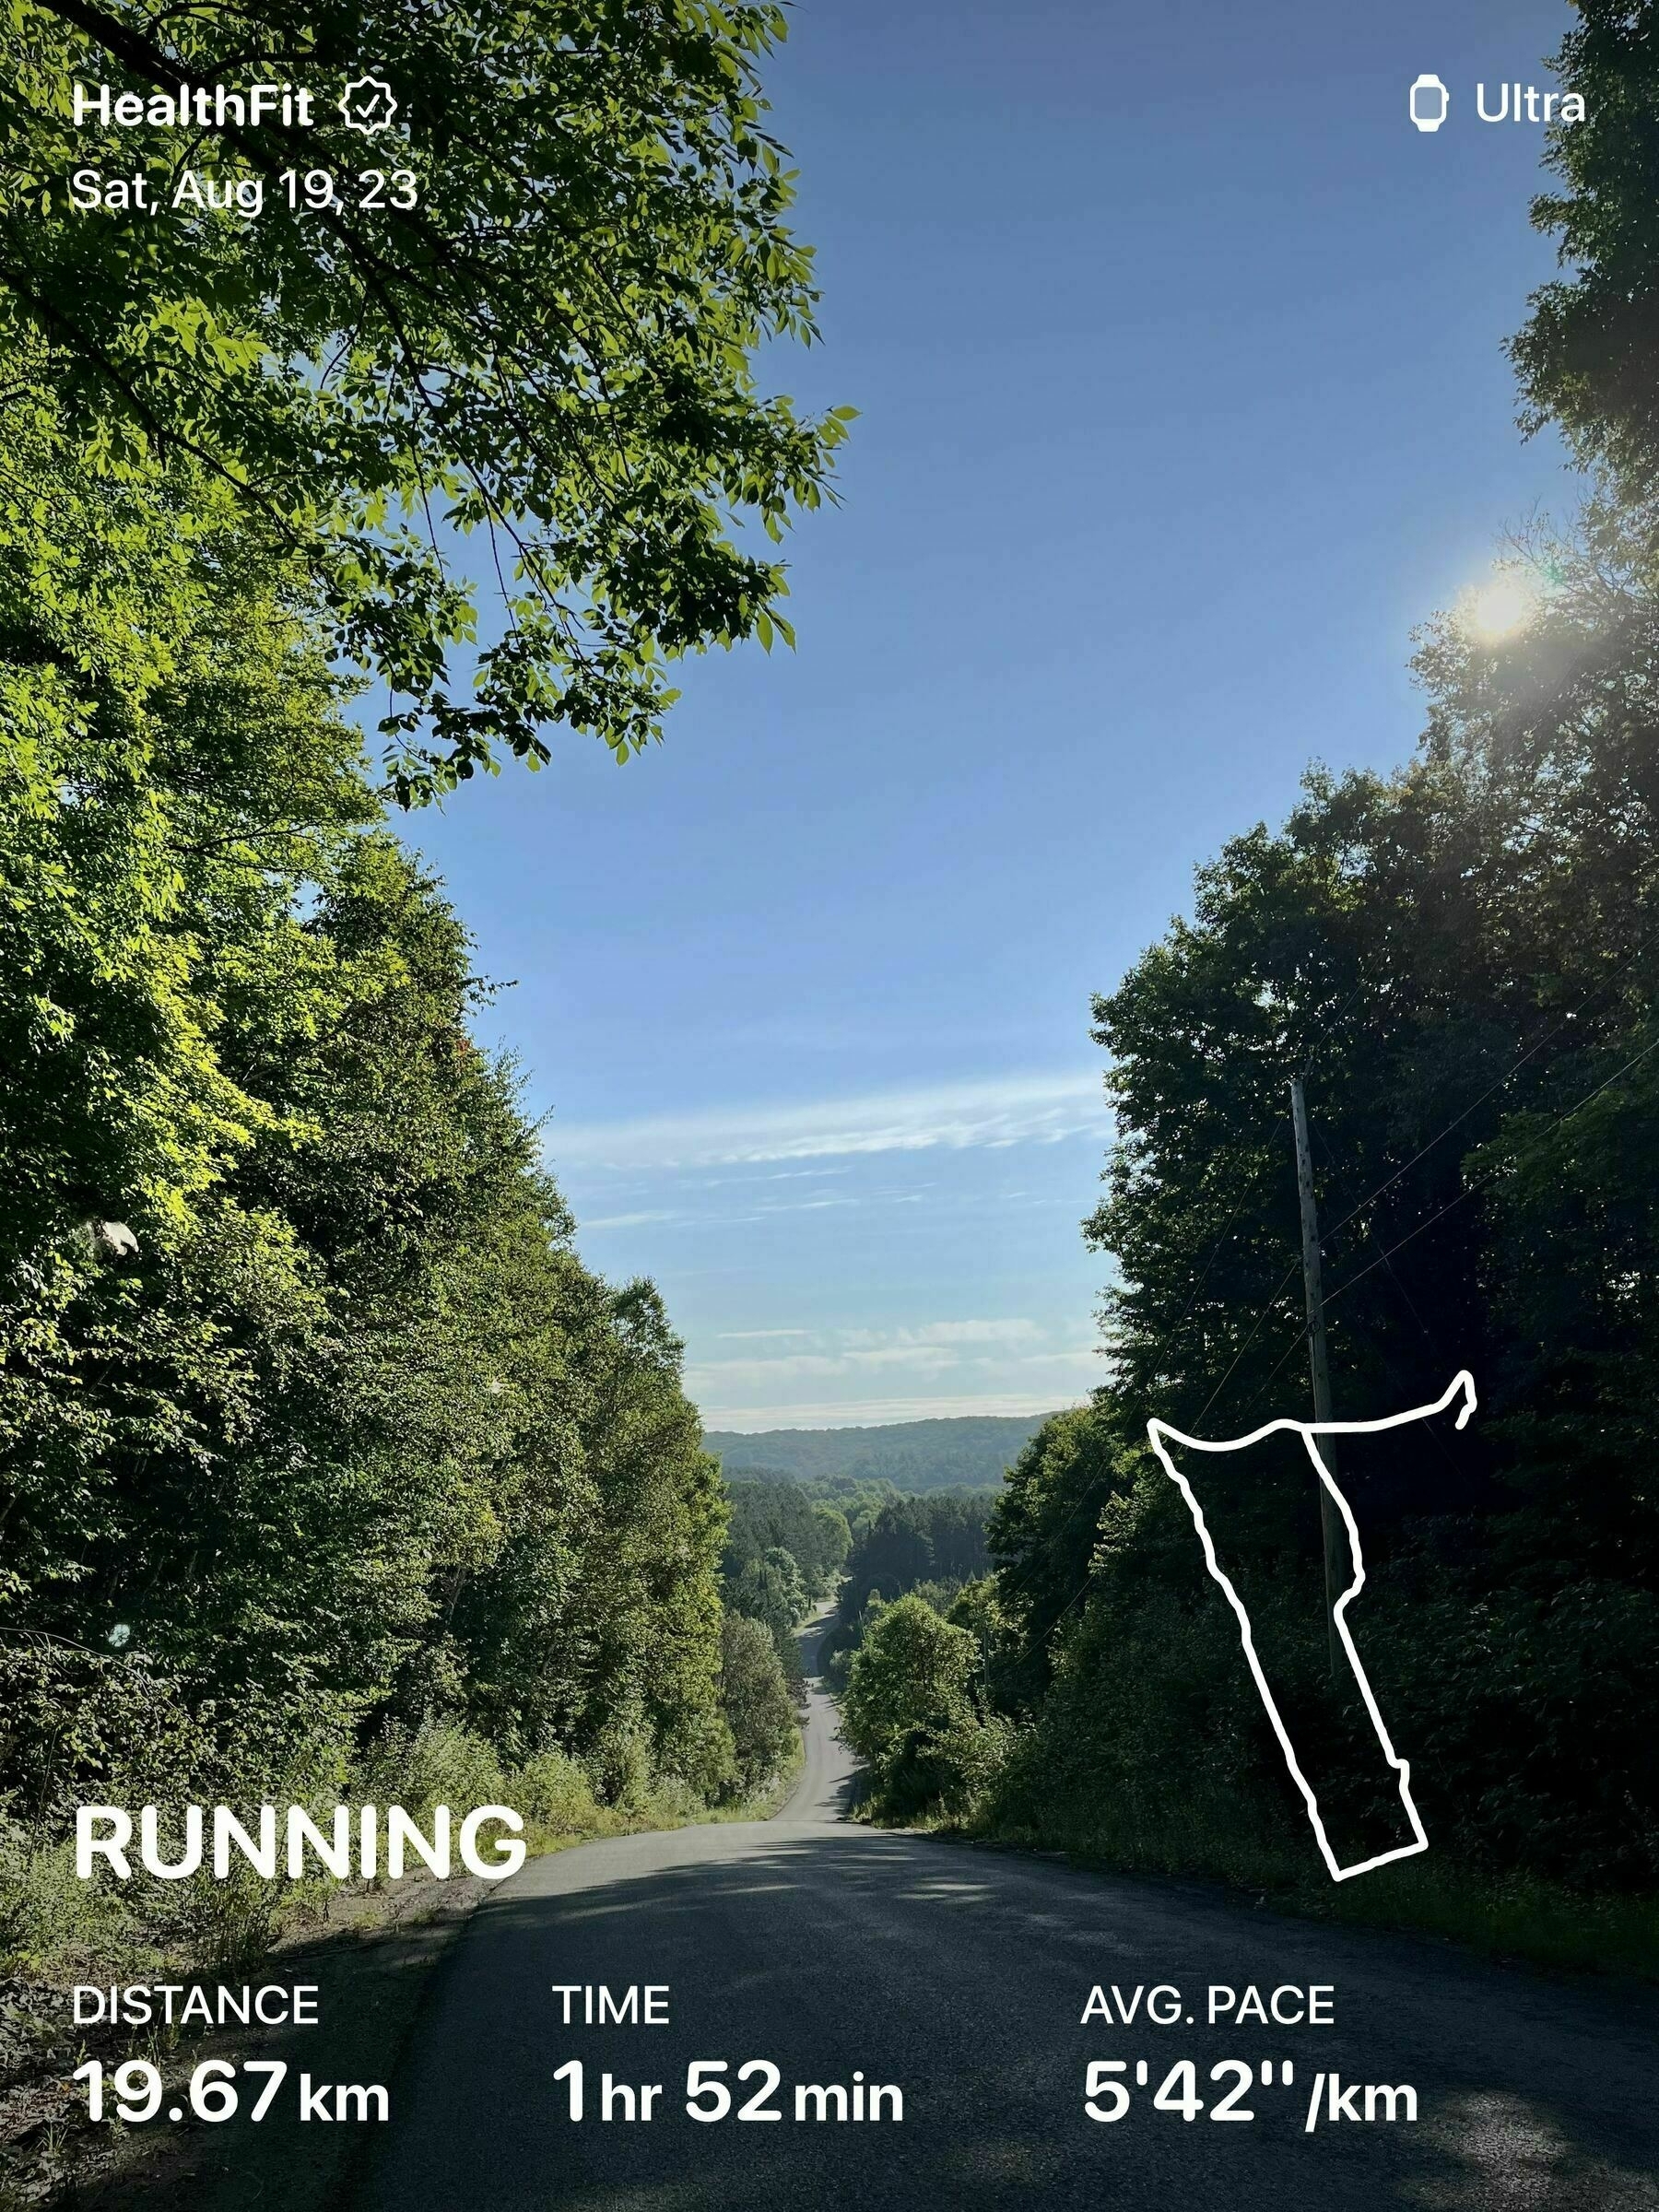 Gravel road through hills with running stats overlaid: 19.67km; 1hr52m